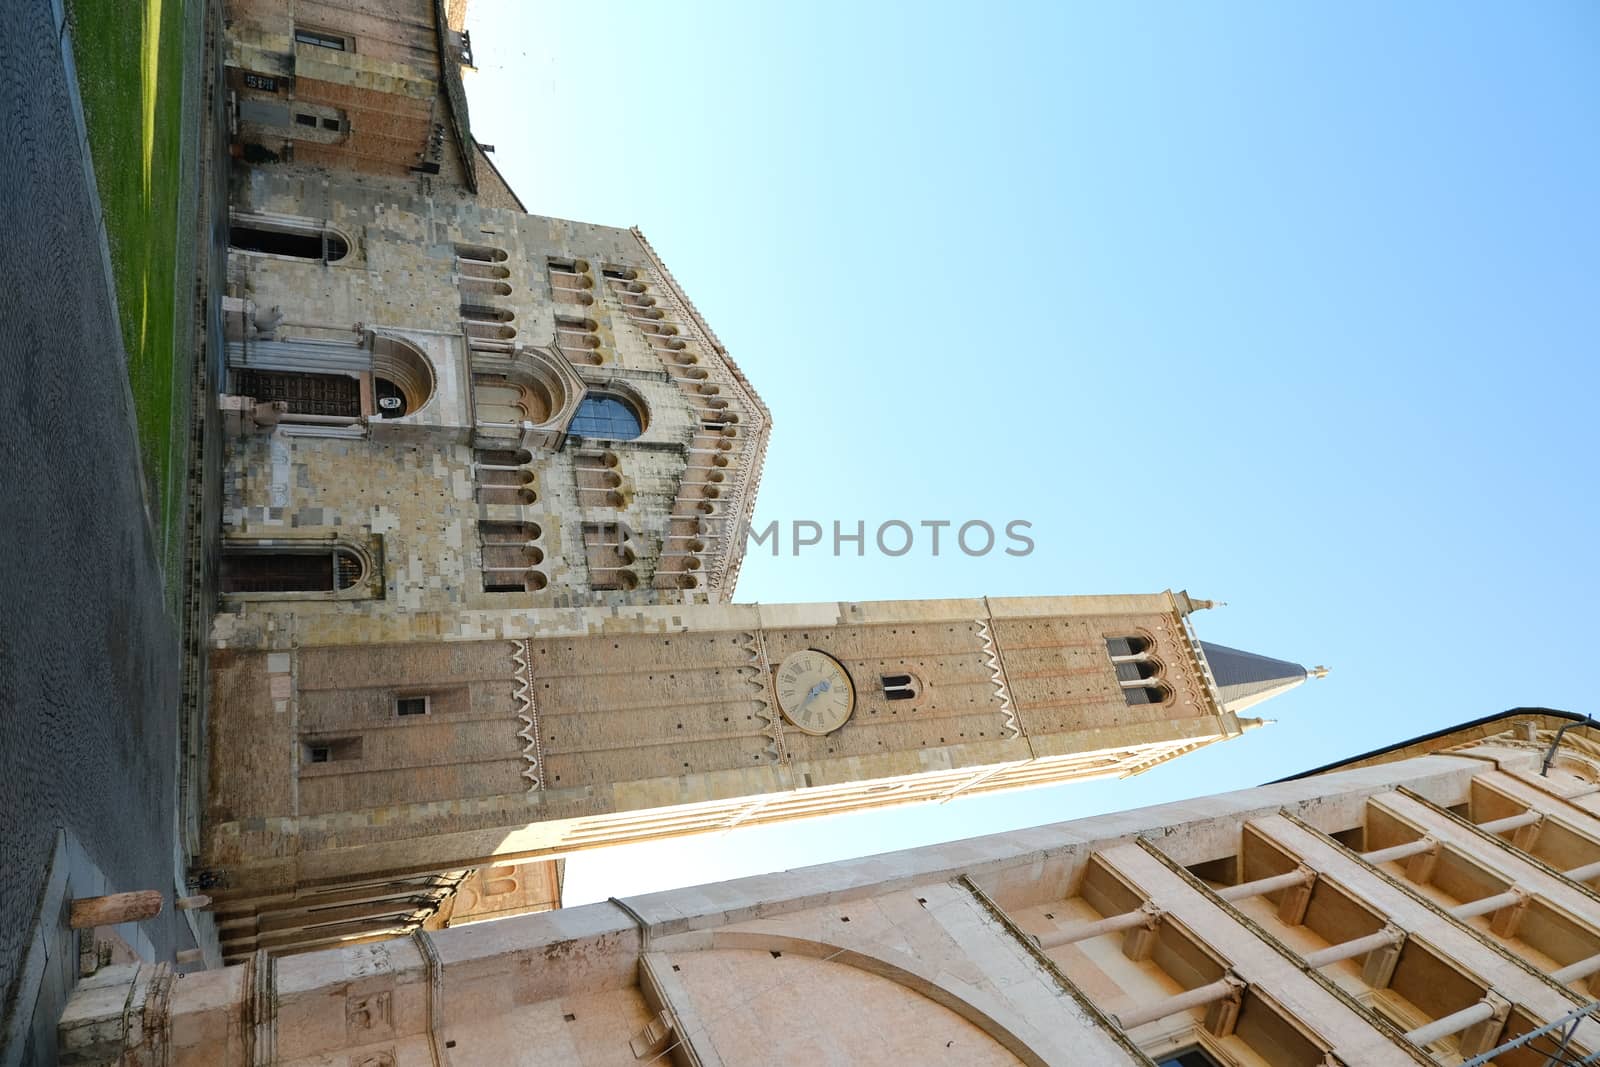 Cathedral, bell tower and baptistery of Parma. The buildings are by Paolo_Grassi